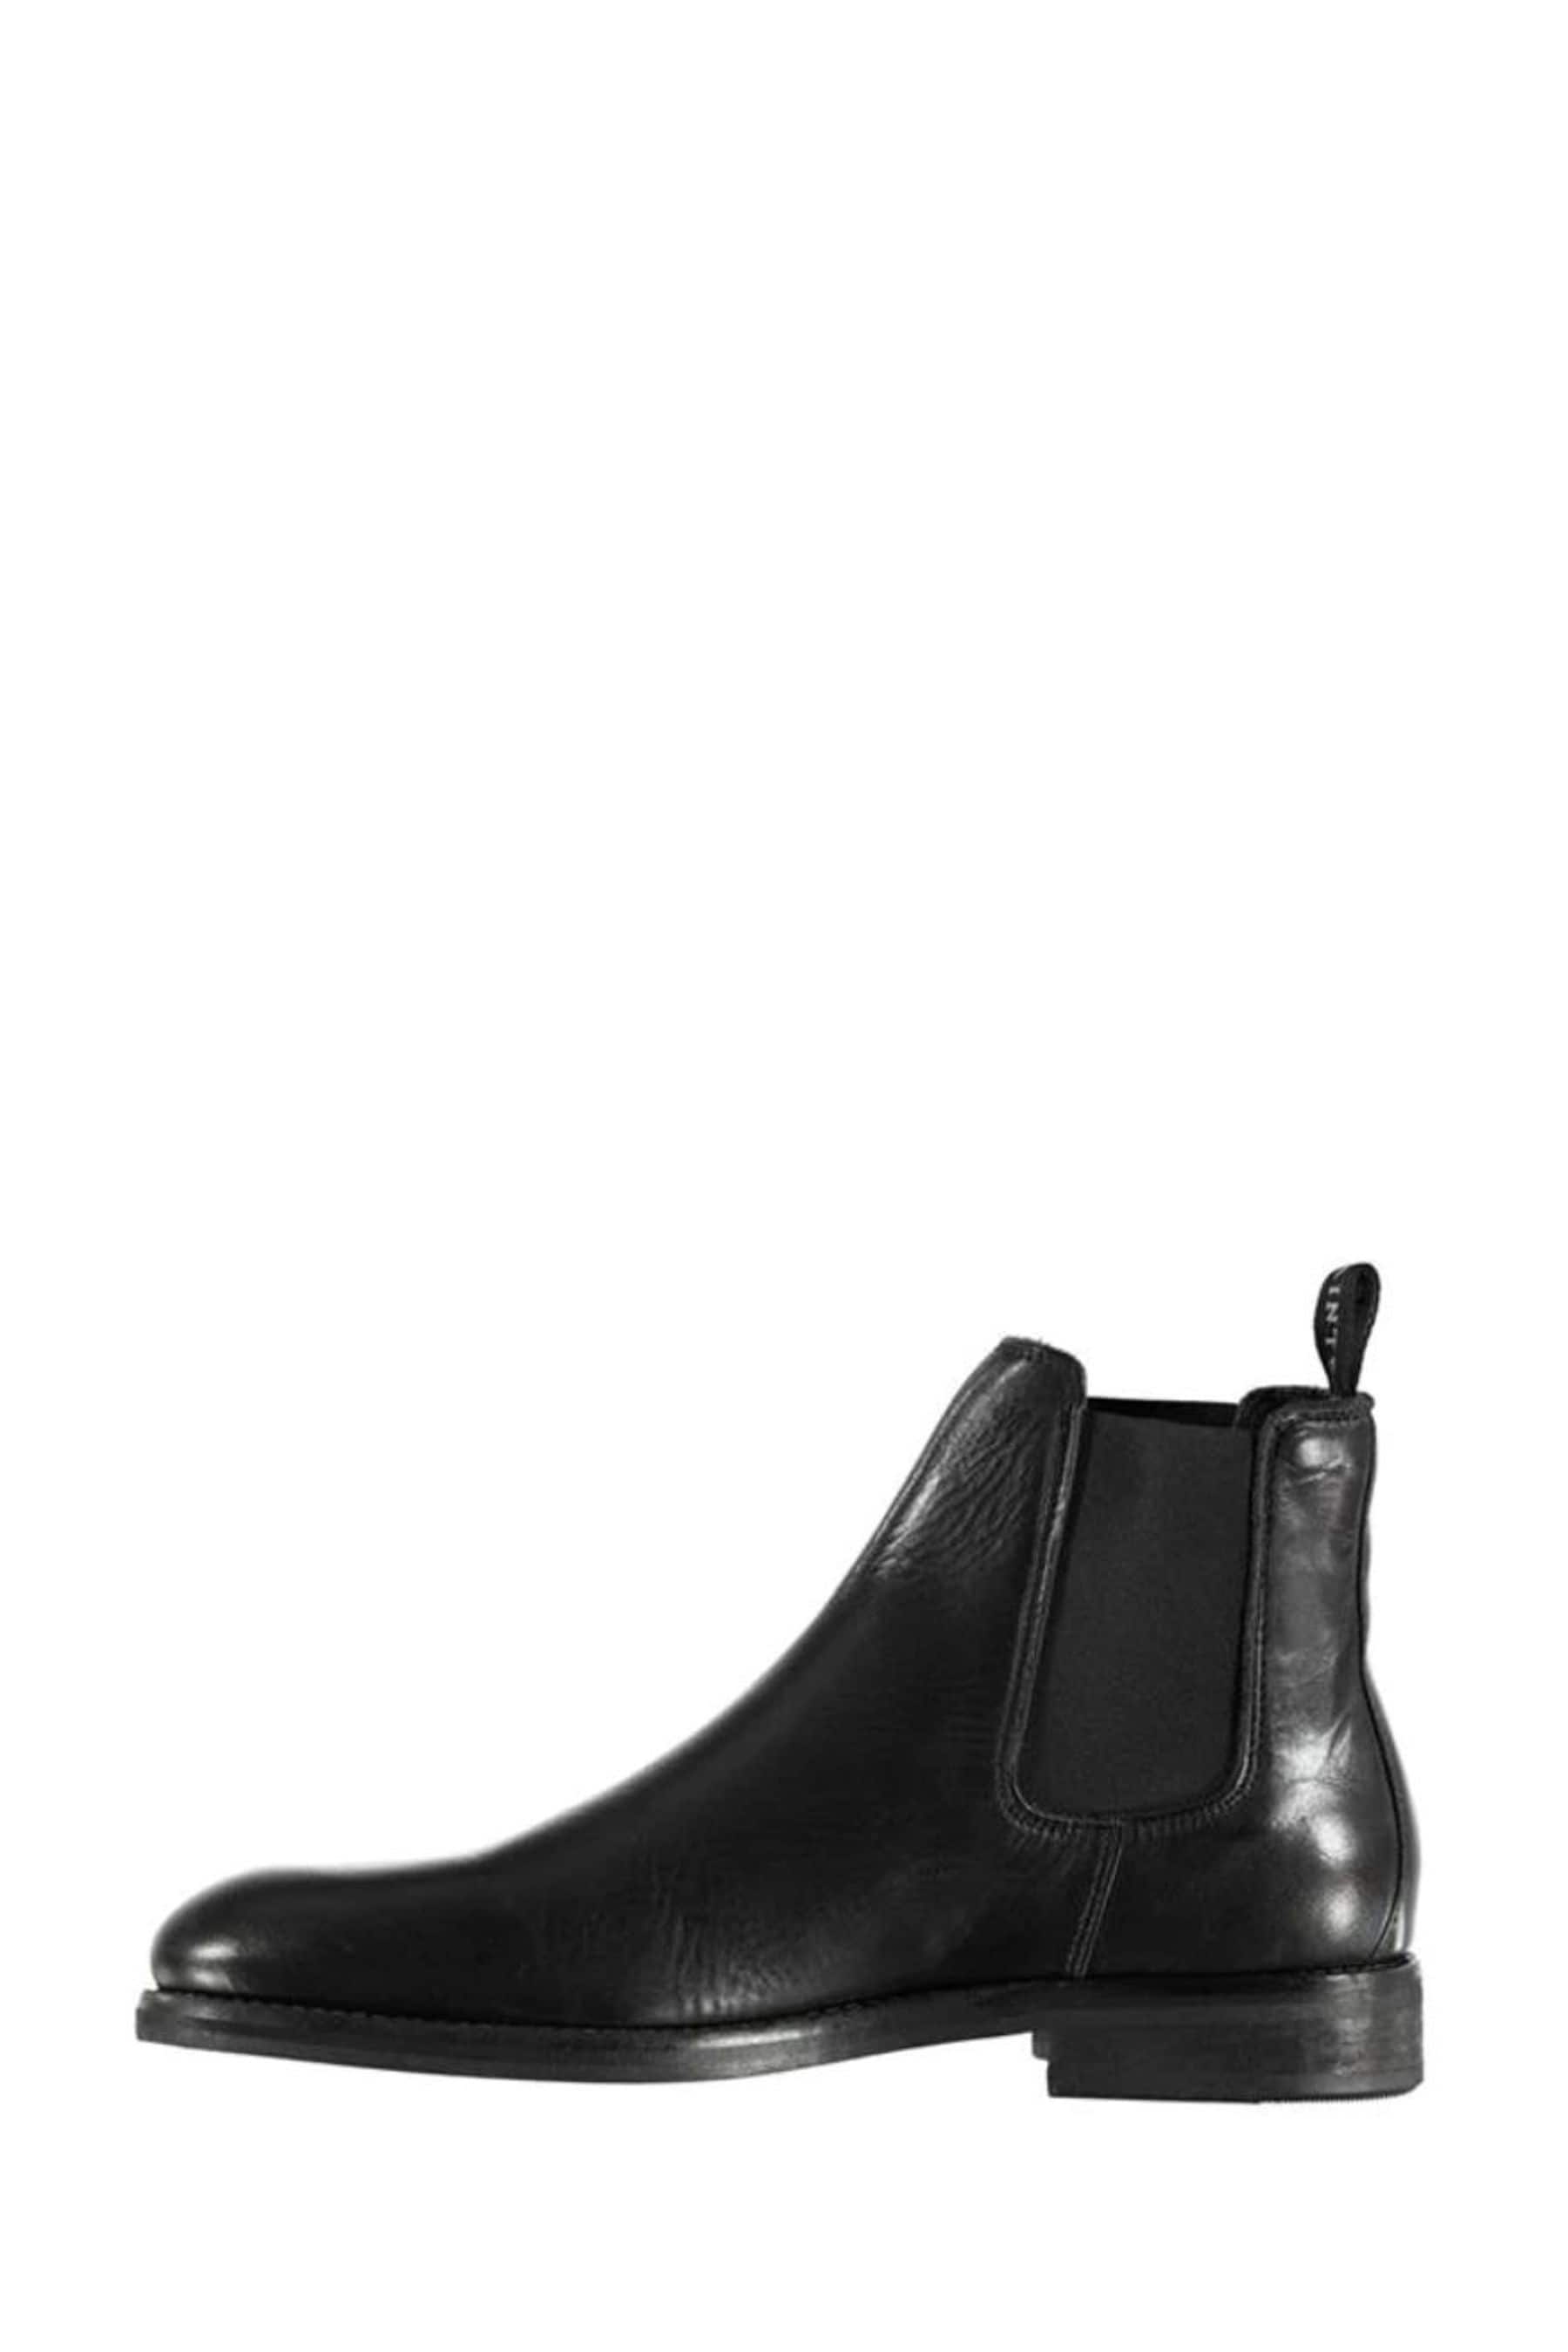 Buy AllSaints Black Harley Chelsea Satin Leather Boots from the Next UK ...